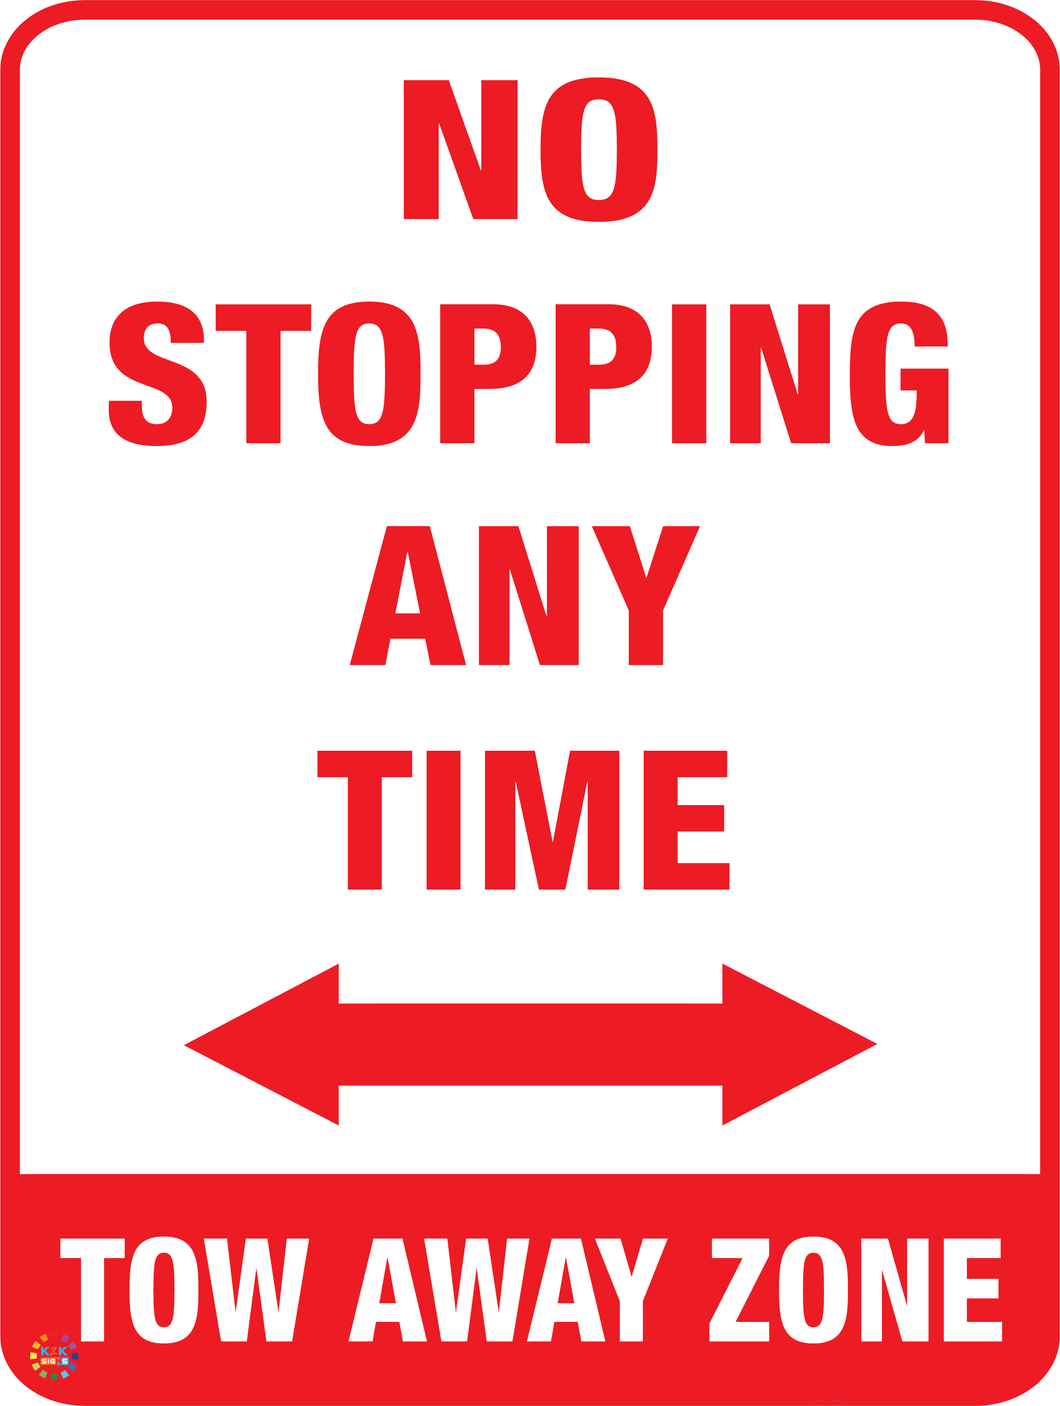 No Stopping Any Time Tow Away Zone (Two Way Arrow) Sign